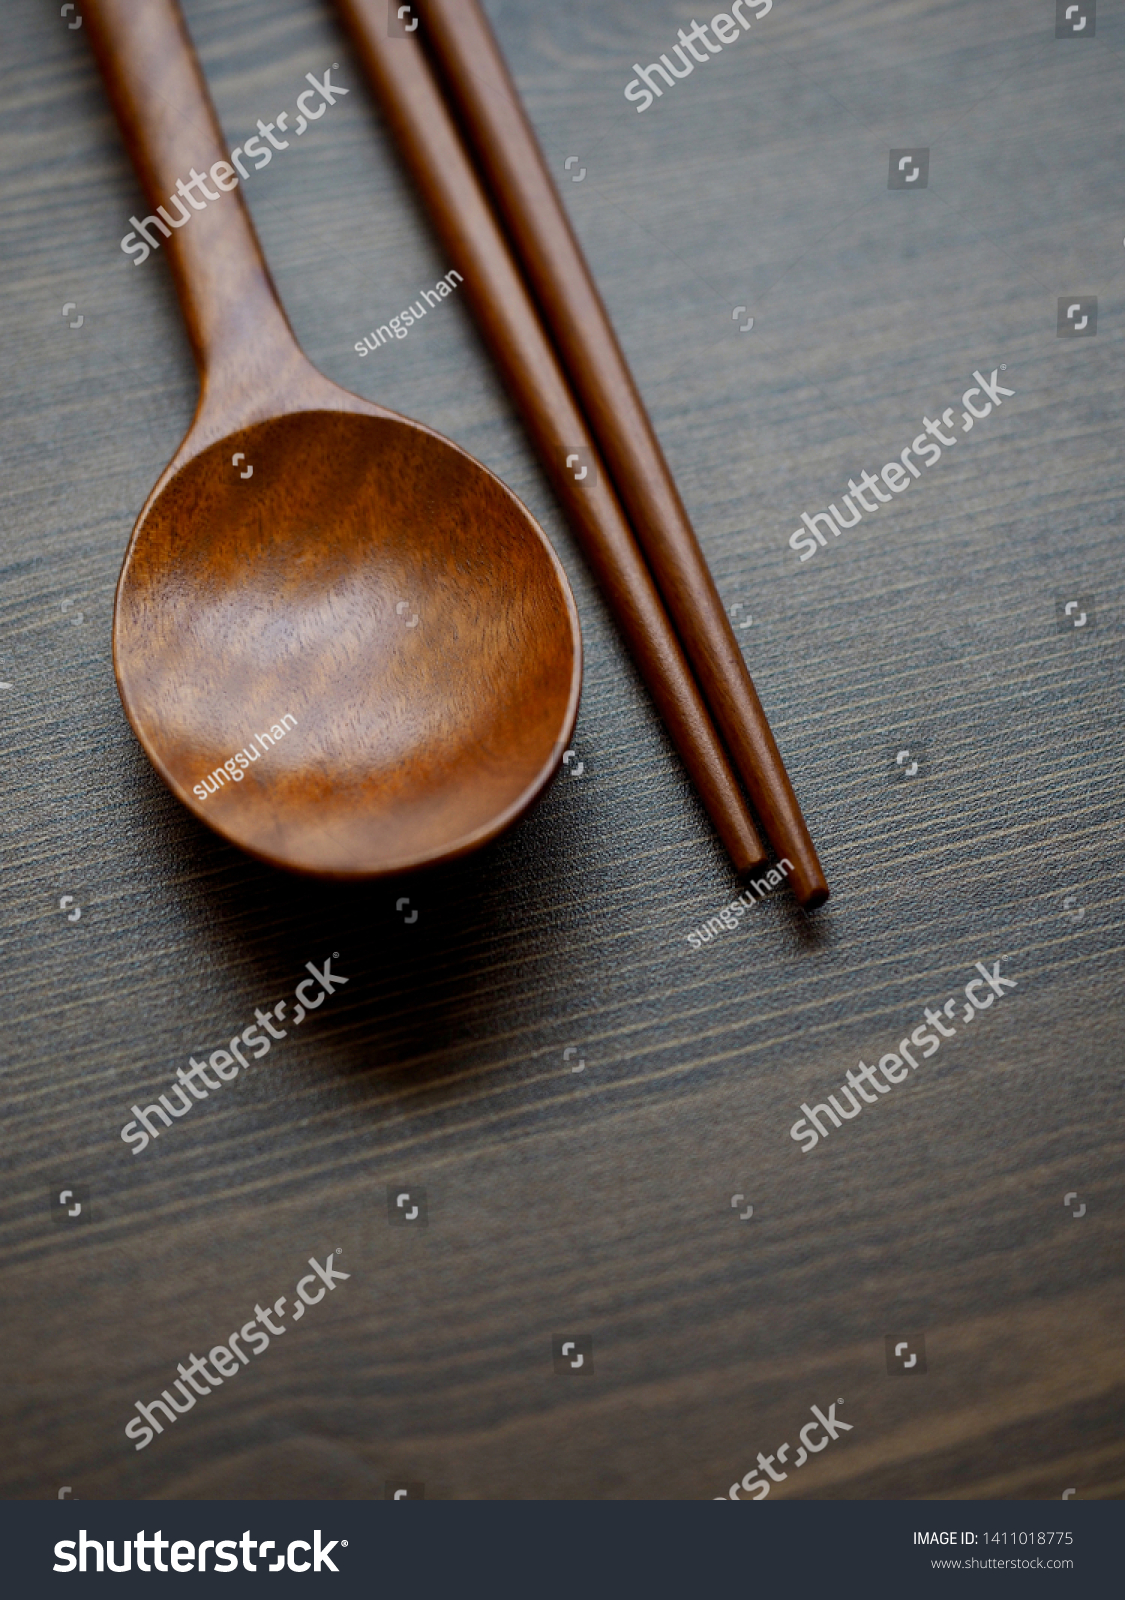 Wooden spoon, Wooden chopsticks and Wooden board background
 #1411018775